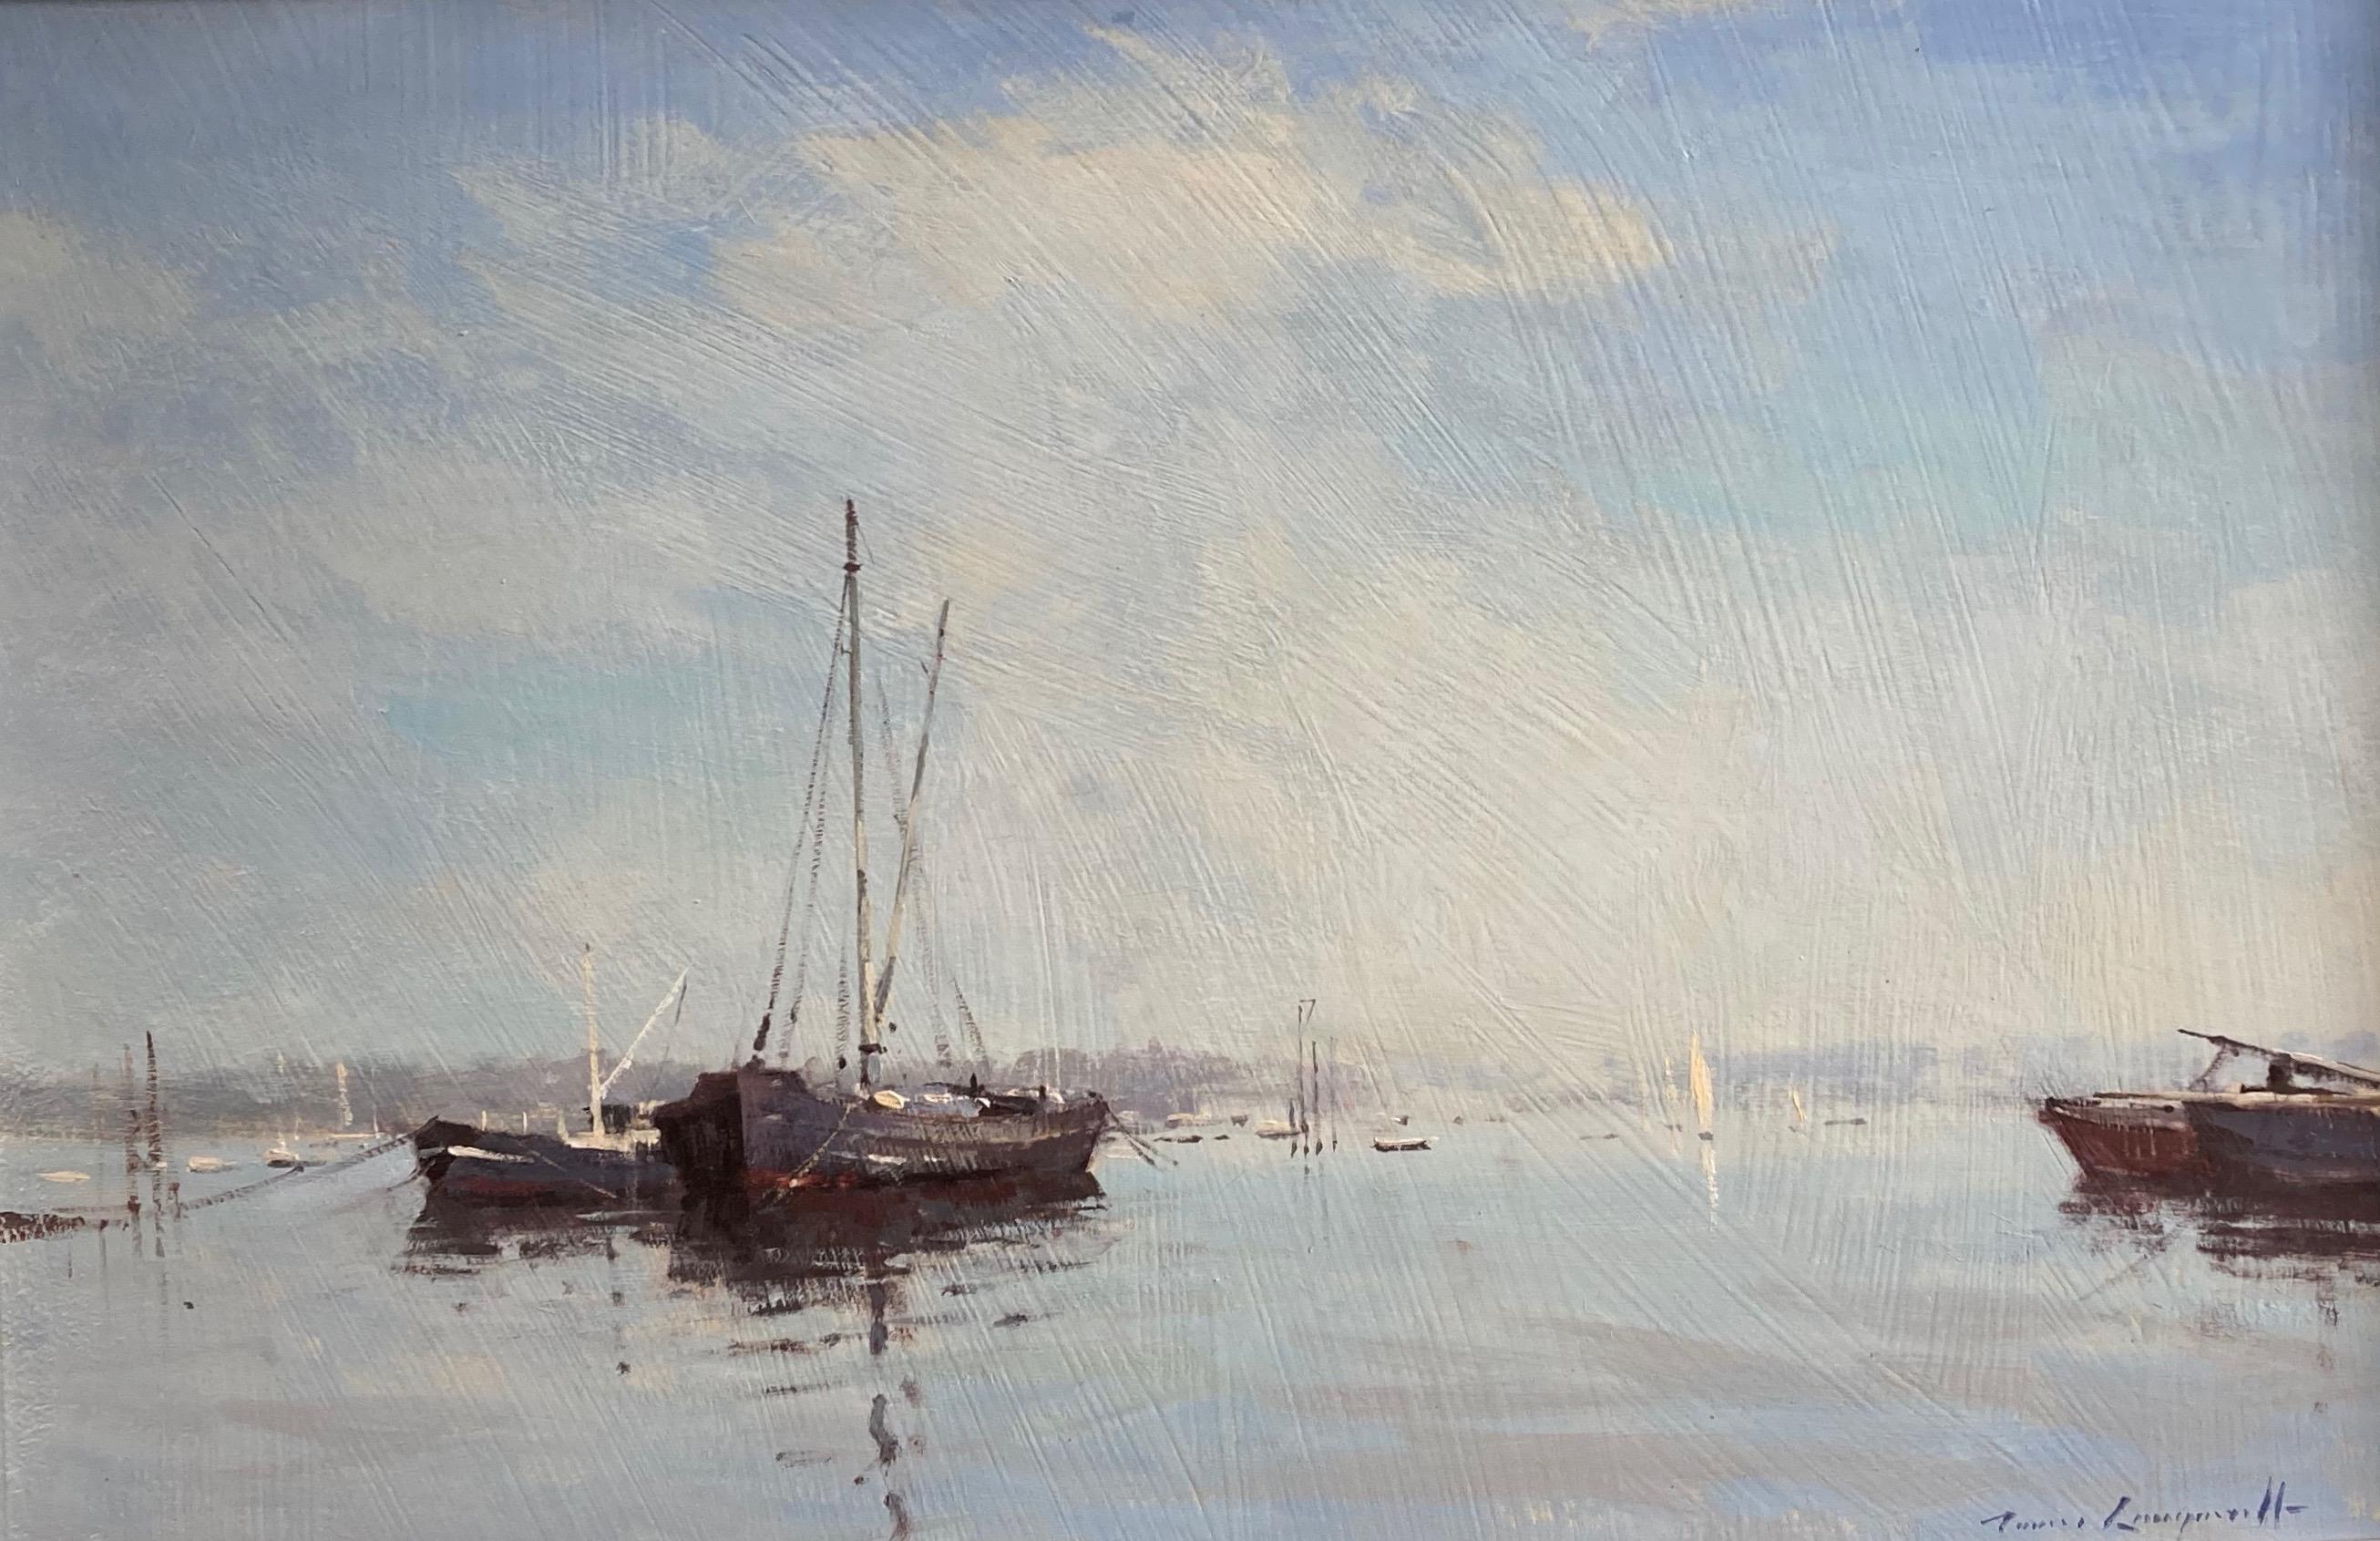 Beautiful light in this view of the river Orwell in Suffolk, close to Pin Mill.

James Longueville (born 1943)
Mist clearing, Pin Mill
Signed
Oil on board
16 x 24 excluding frame
22 x 30 inches with the frame

James Longueville was born in 1942 at